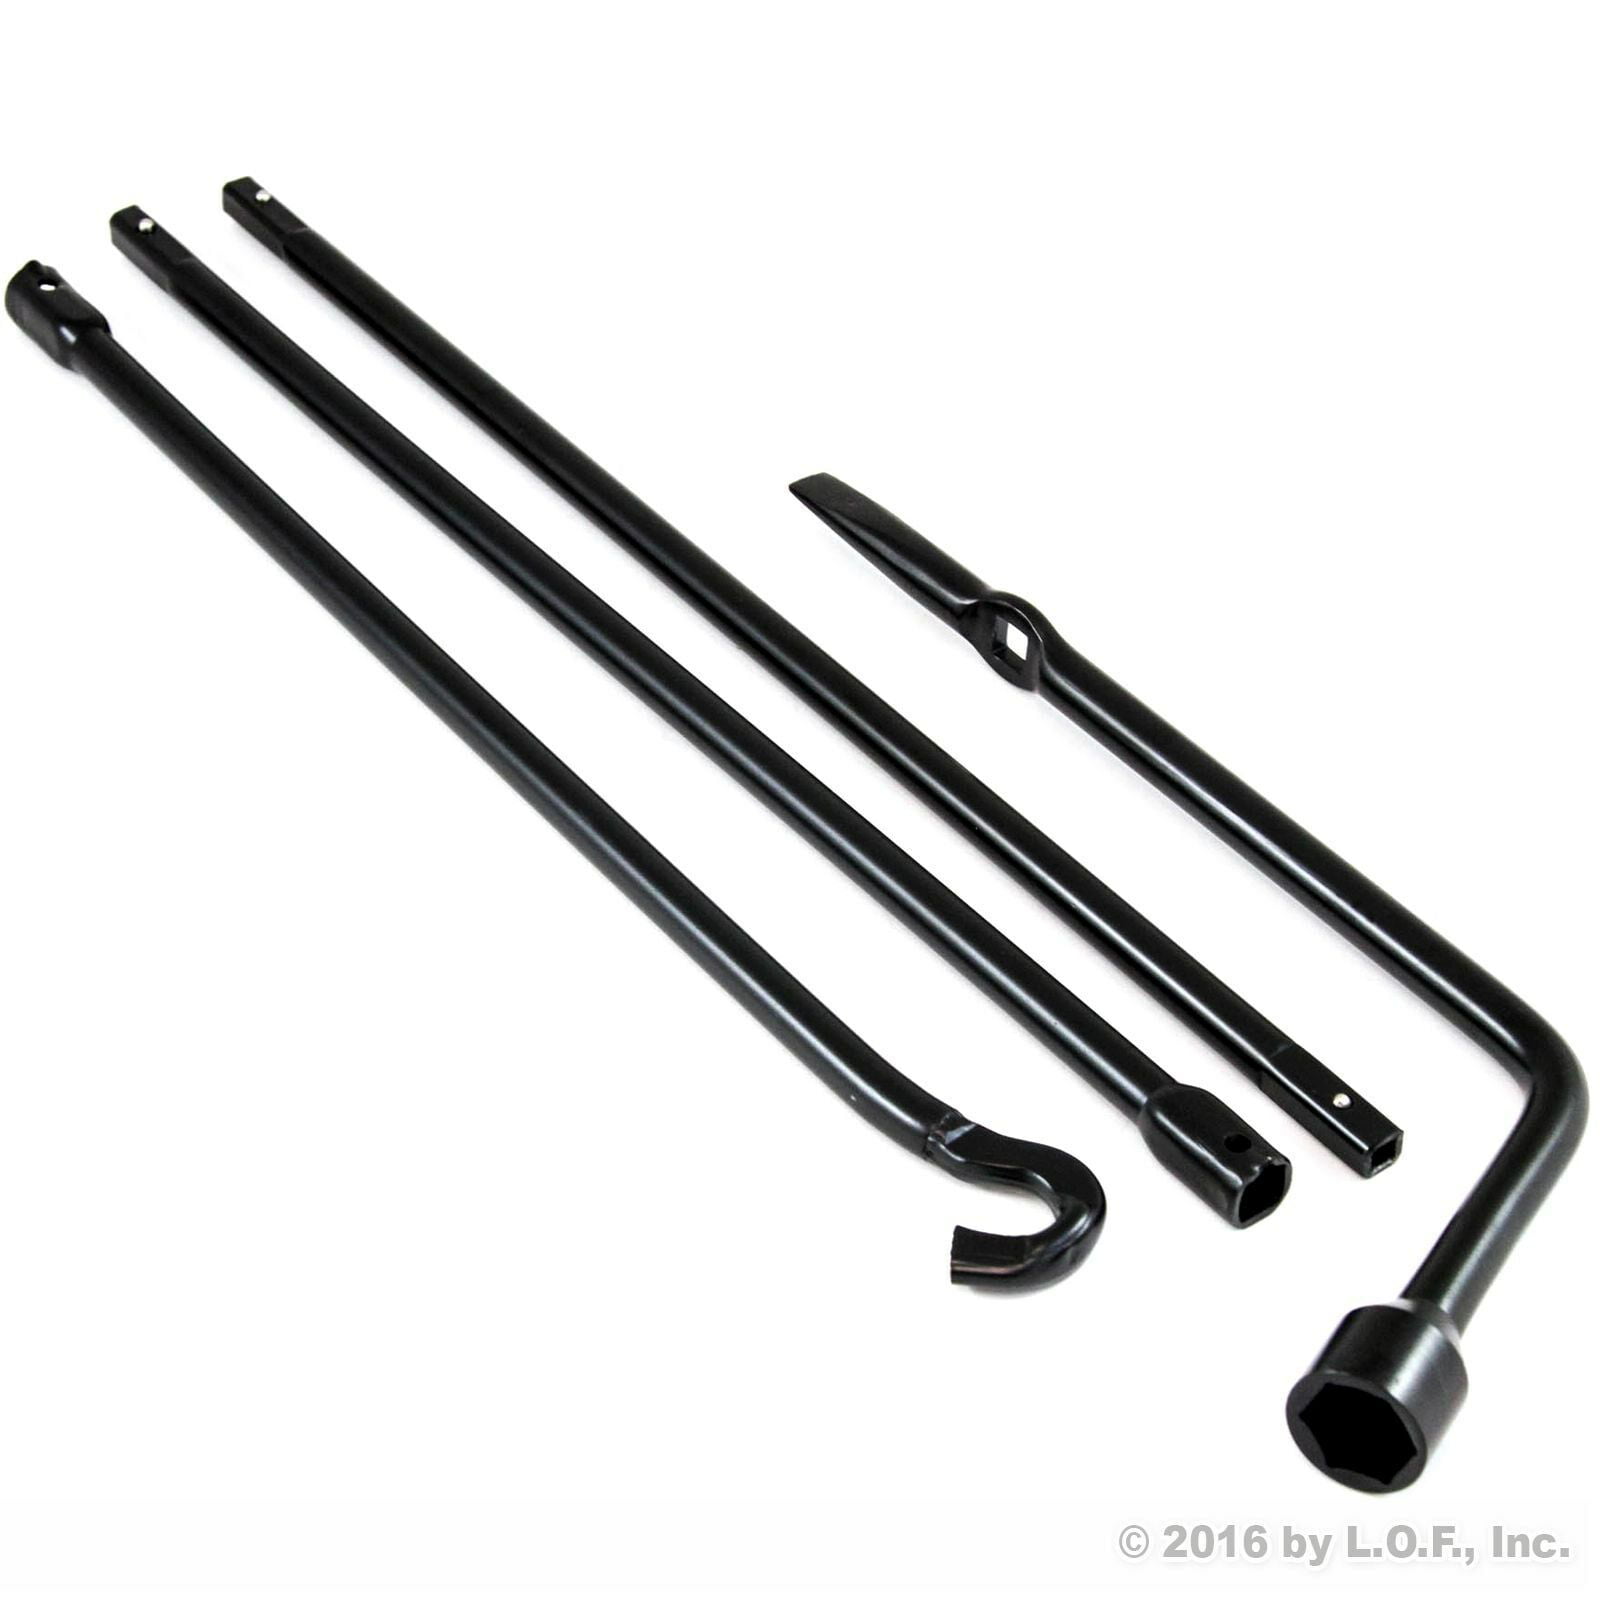 for 2005-2013 Toyota Tacoma Jack Spare Lug Wrench Tire Tool Kit 4PCS Spare Tire Lug Wrench Spare Tire Tool Kit Lug Wrench Tool Tire Repair Set Repair Tools Set with Carrying Pouch Bag Black